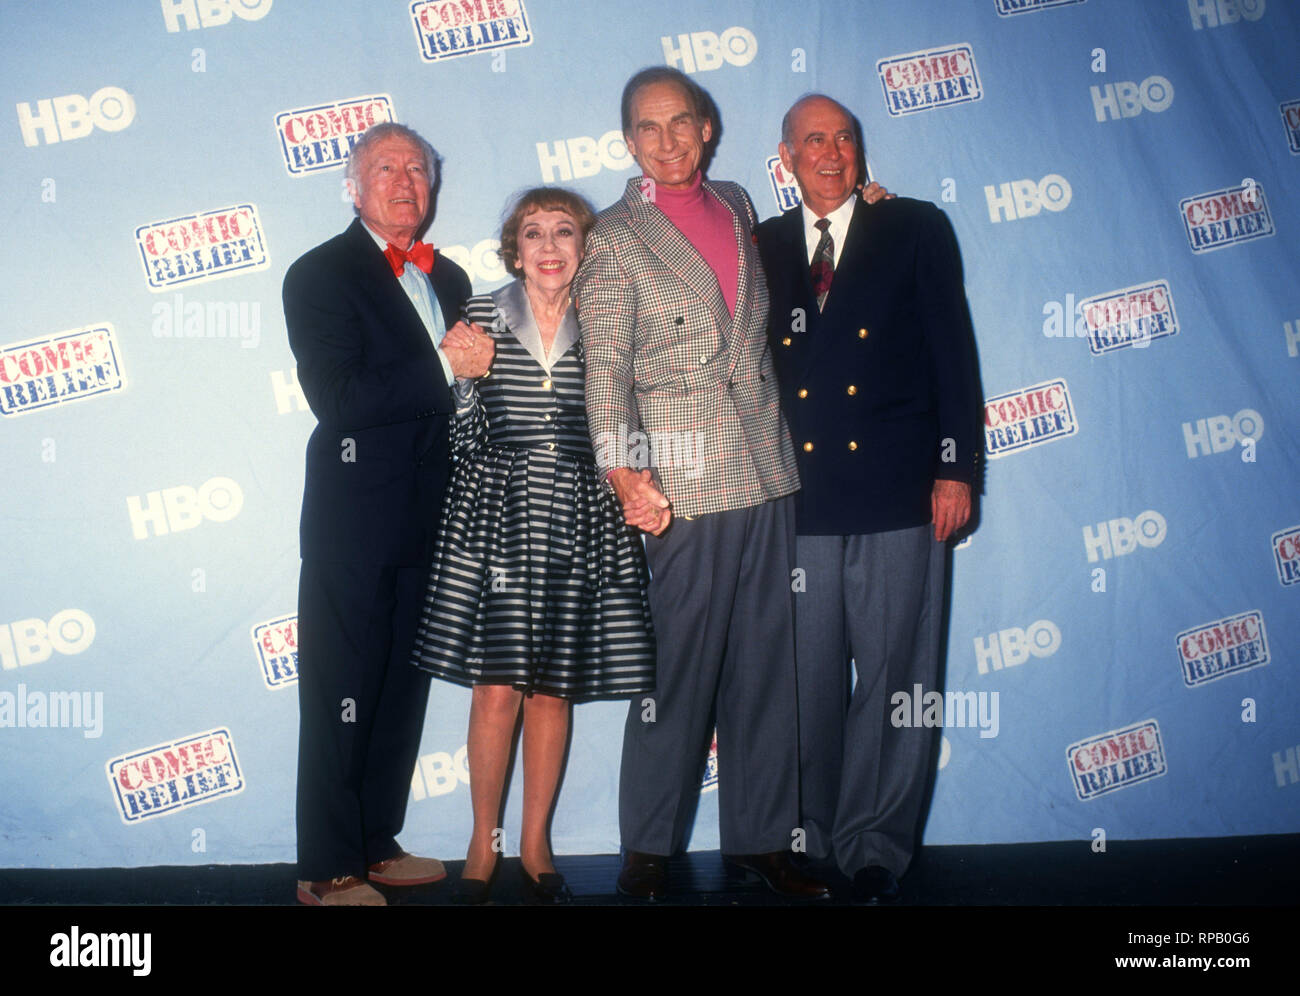 LOS ANGELES, CA - JANUARY 15: (L-R) Actor Howard Morris, actress Imogene Coca, actor Sid Caesar and comedian Carl Reiner attend the 'Comic Relief VI' HBO's Comedy Television Special to Benefit America's Homeless on January 15, 1994 at Shrine Auditorium in Los Angeles, California. Photo by Barry King/Alamy Stock Photo Stock Photo